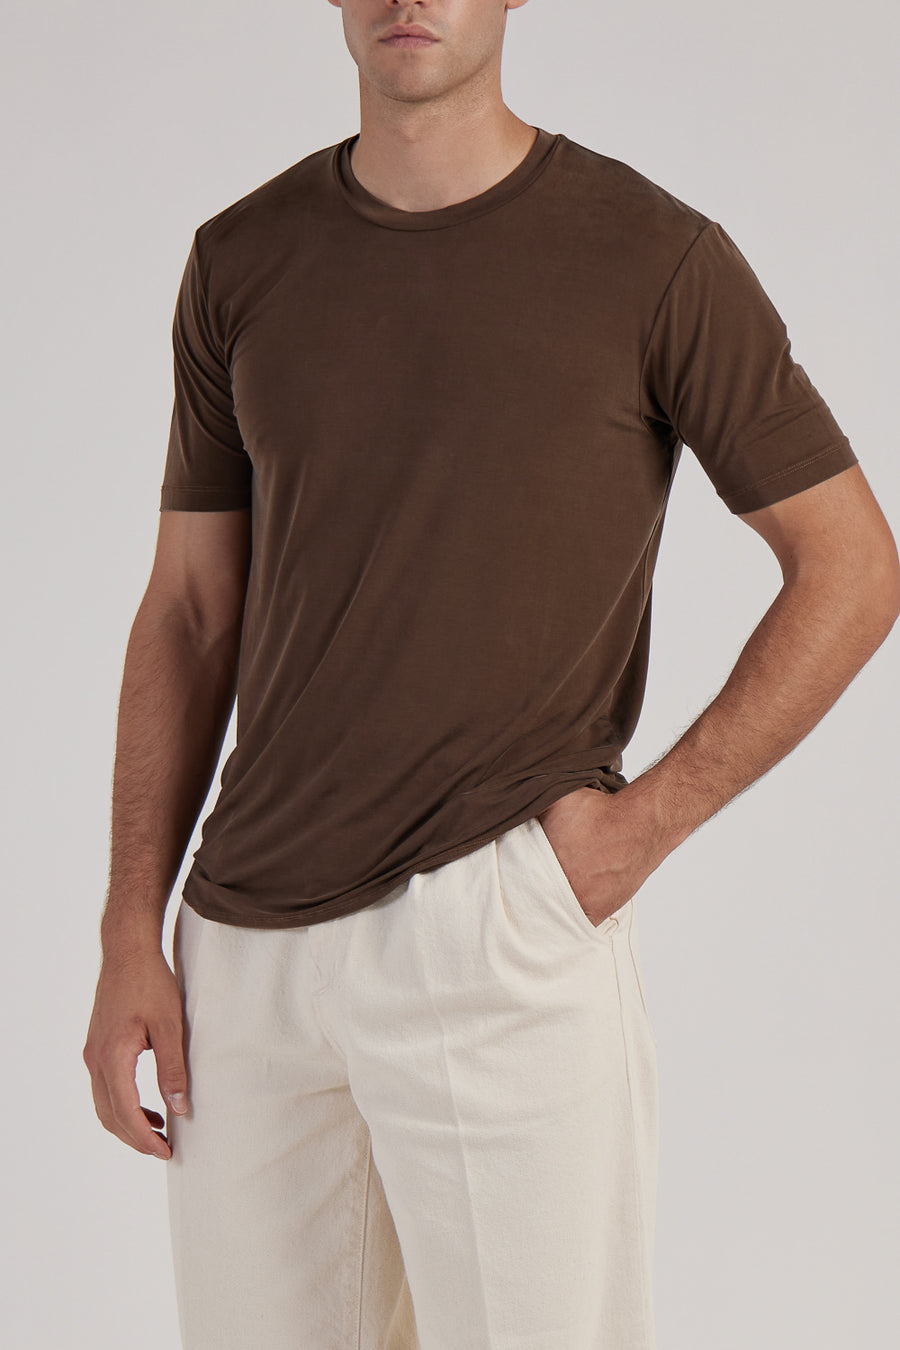 Buy the Daniele Fiesoli Cotton/Silk Round Neck T-Shirt in Brown at Intro. Spend £50 for free UK delivery. Official stockists. We ship worldwide.